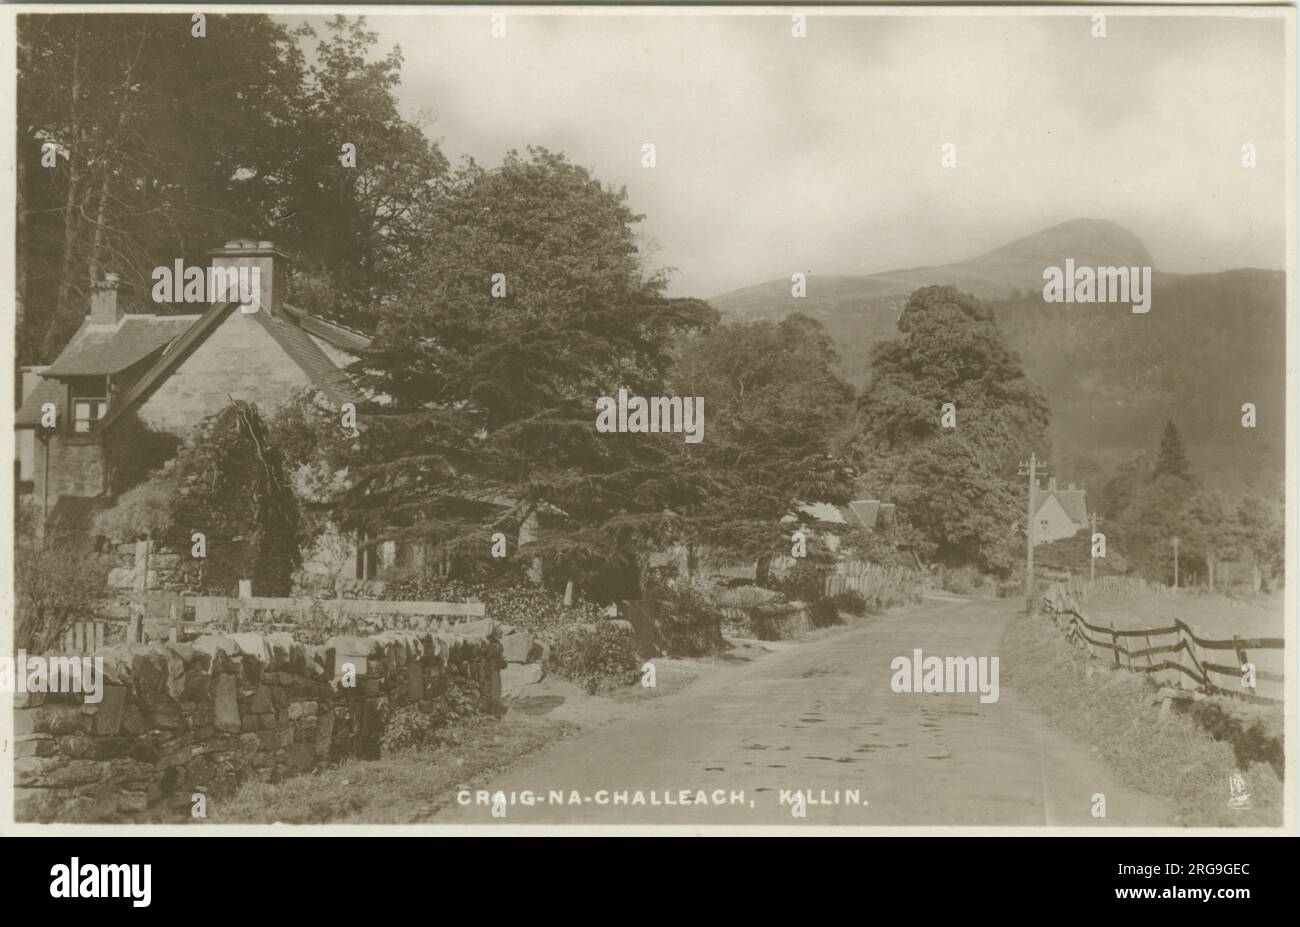 Craig-Na-Challeach, Killin, Stirling, Loch Tay, Stirlingshire, Écosse. Banque D'Images